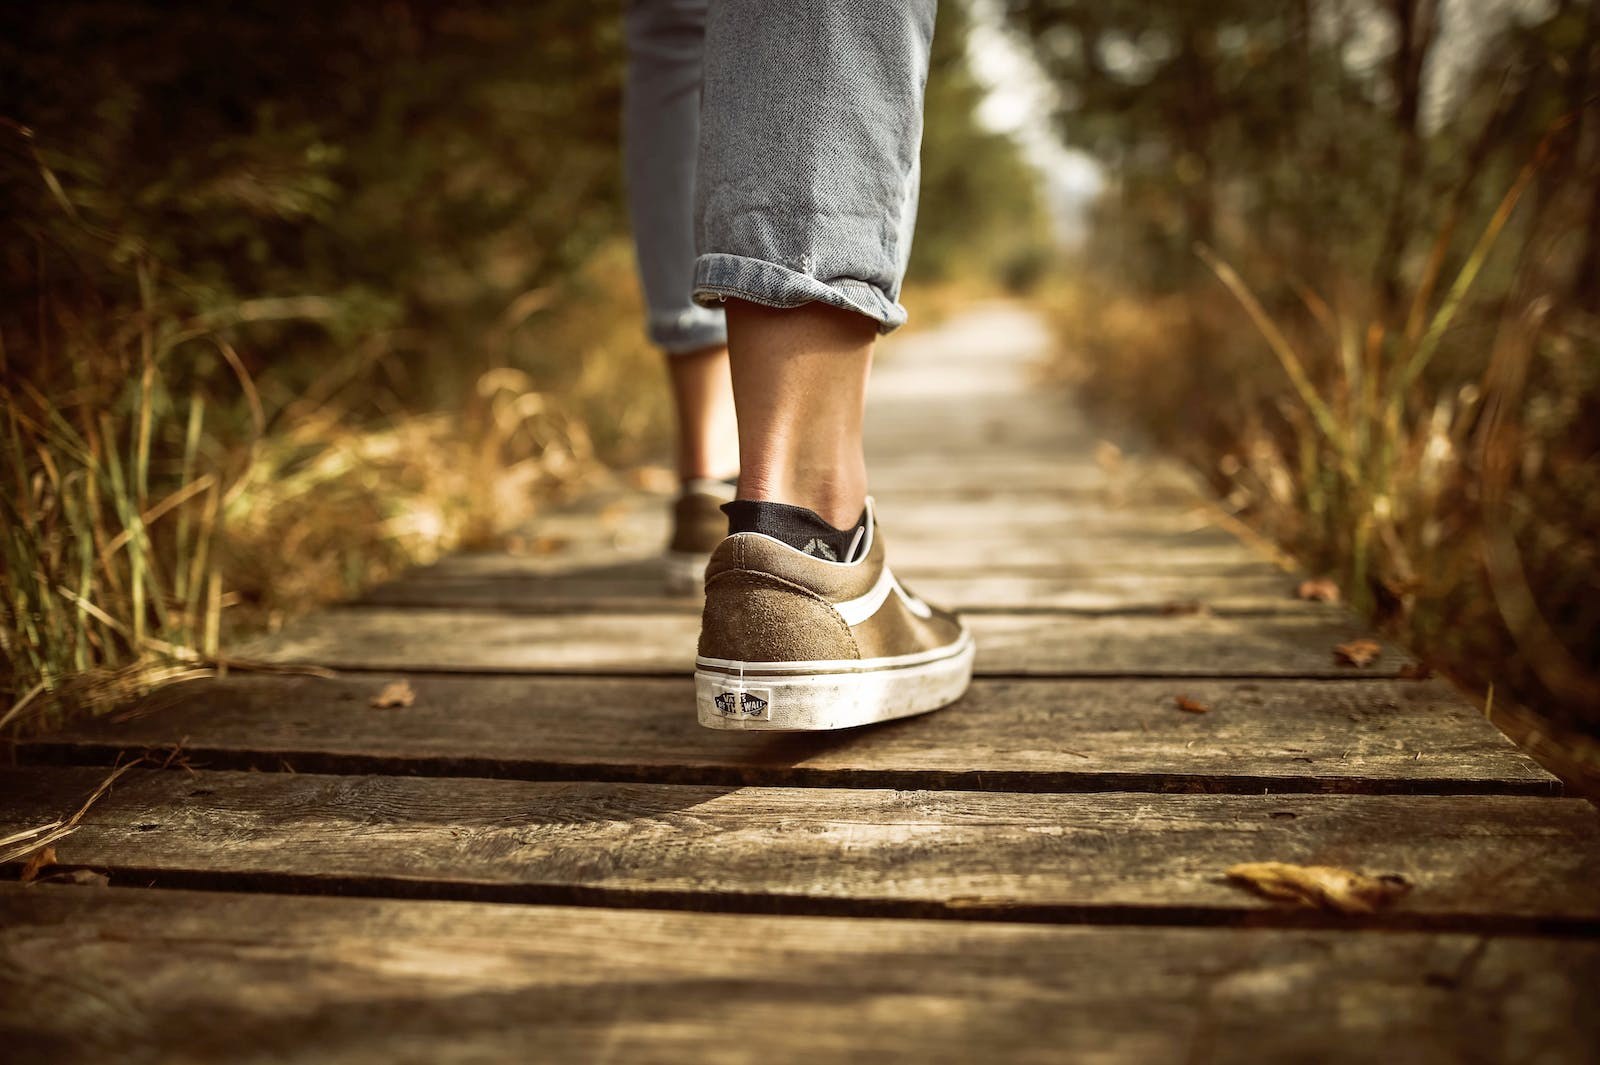 This is an image of a person walking on a wooden pathway.